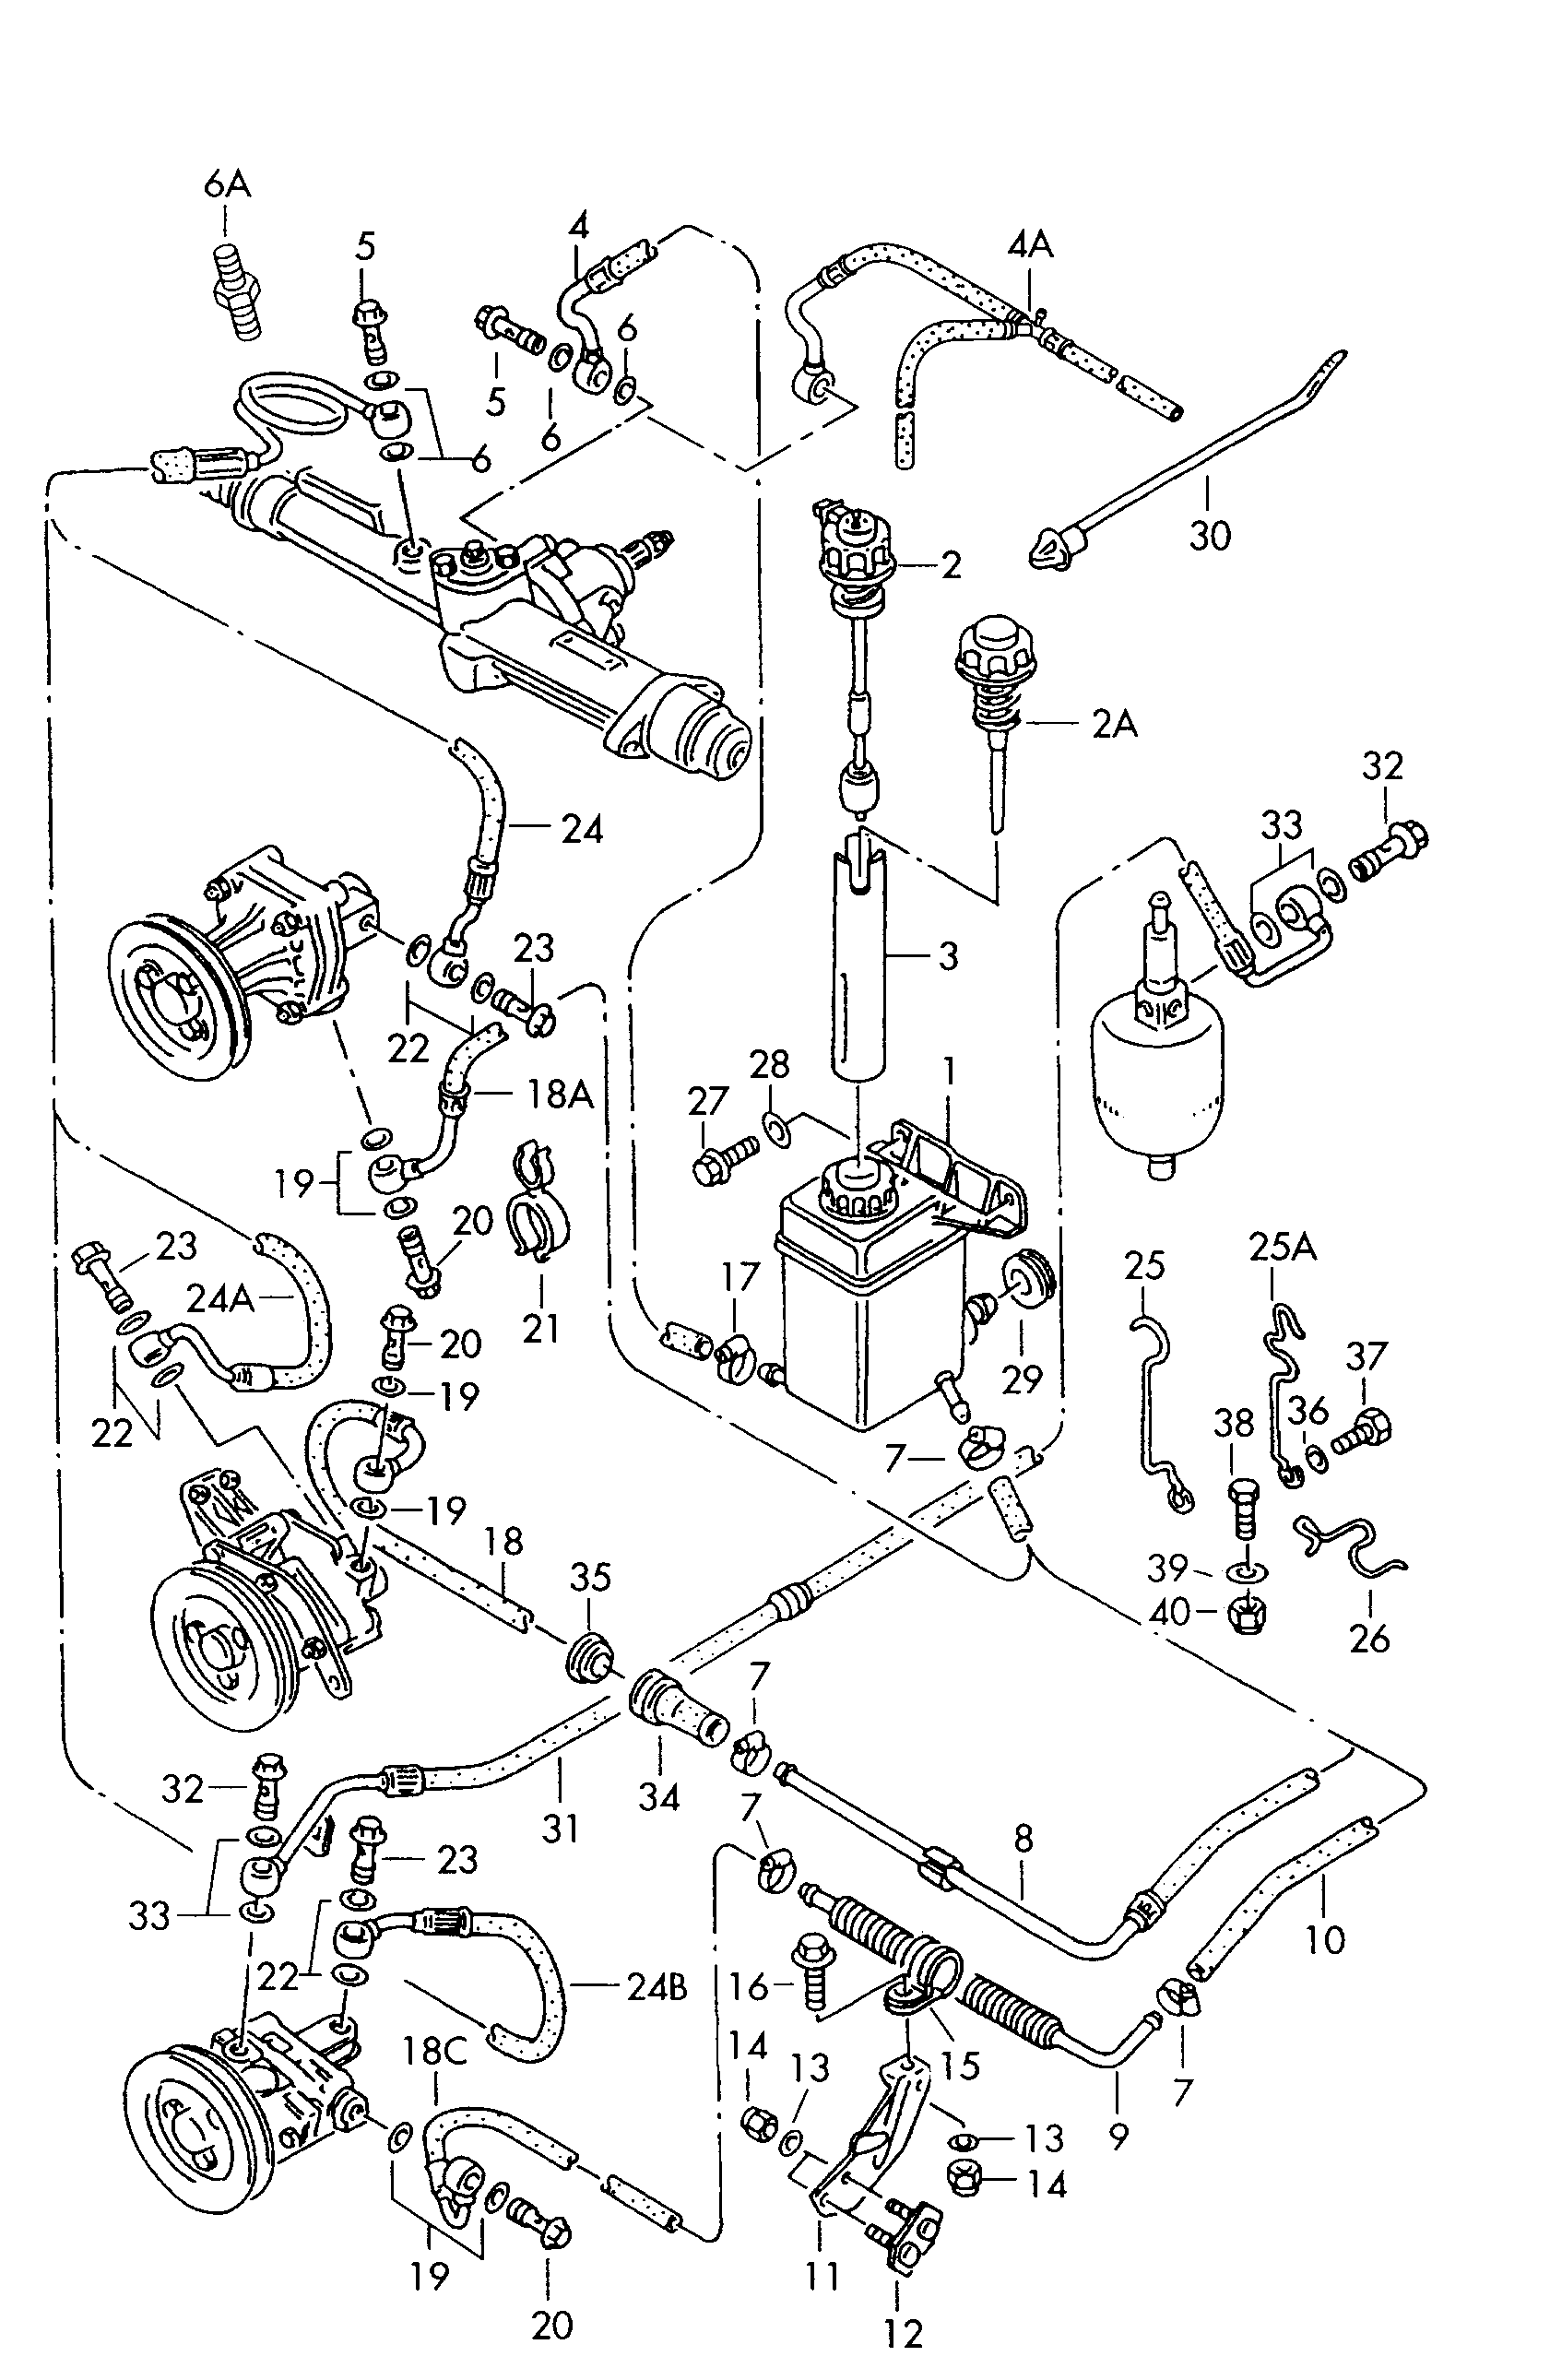 oil container and connection
parts, hoses - Audi Coupe quattro(ACOQ)  